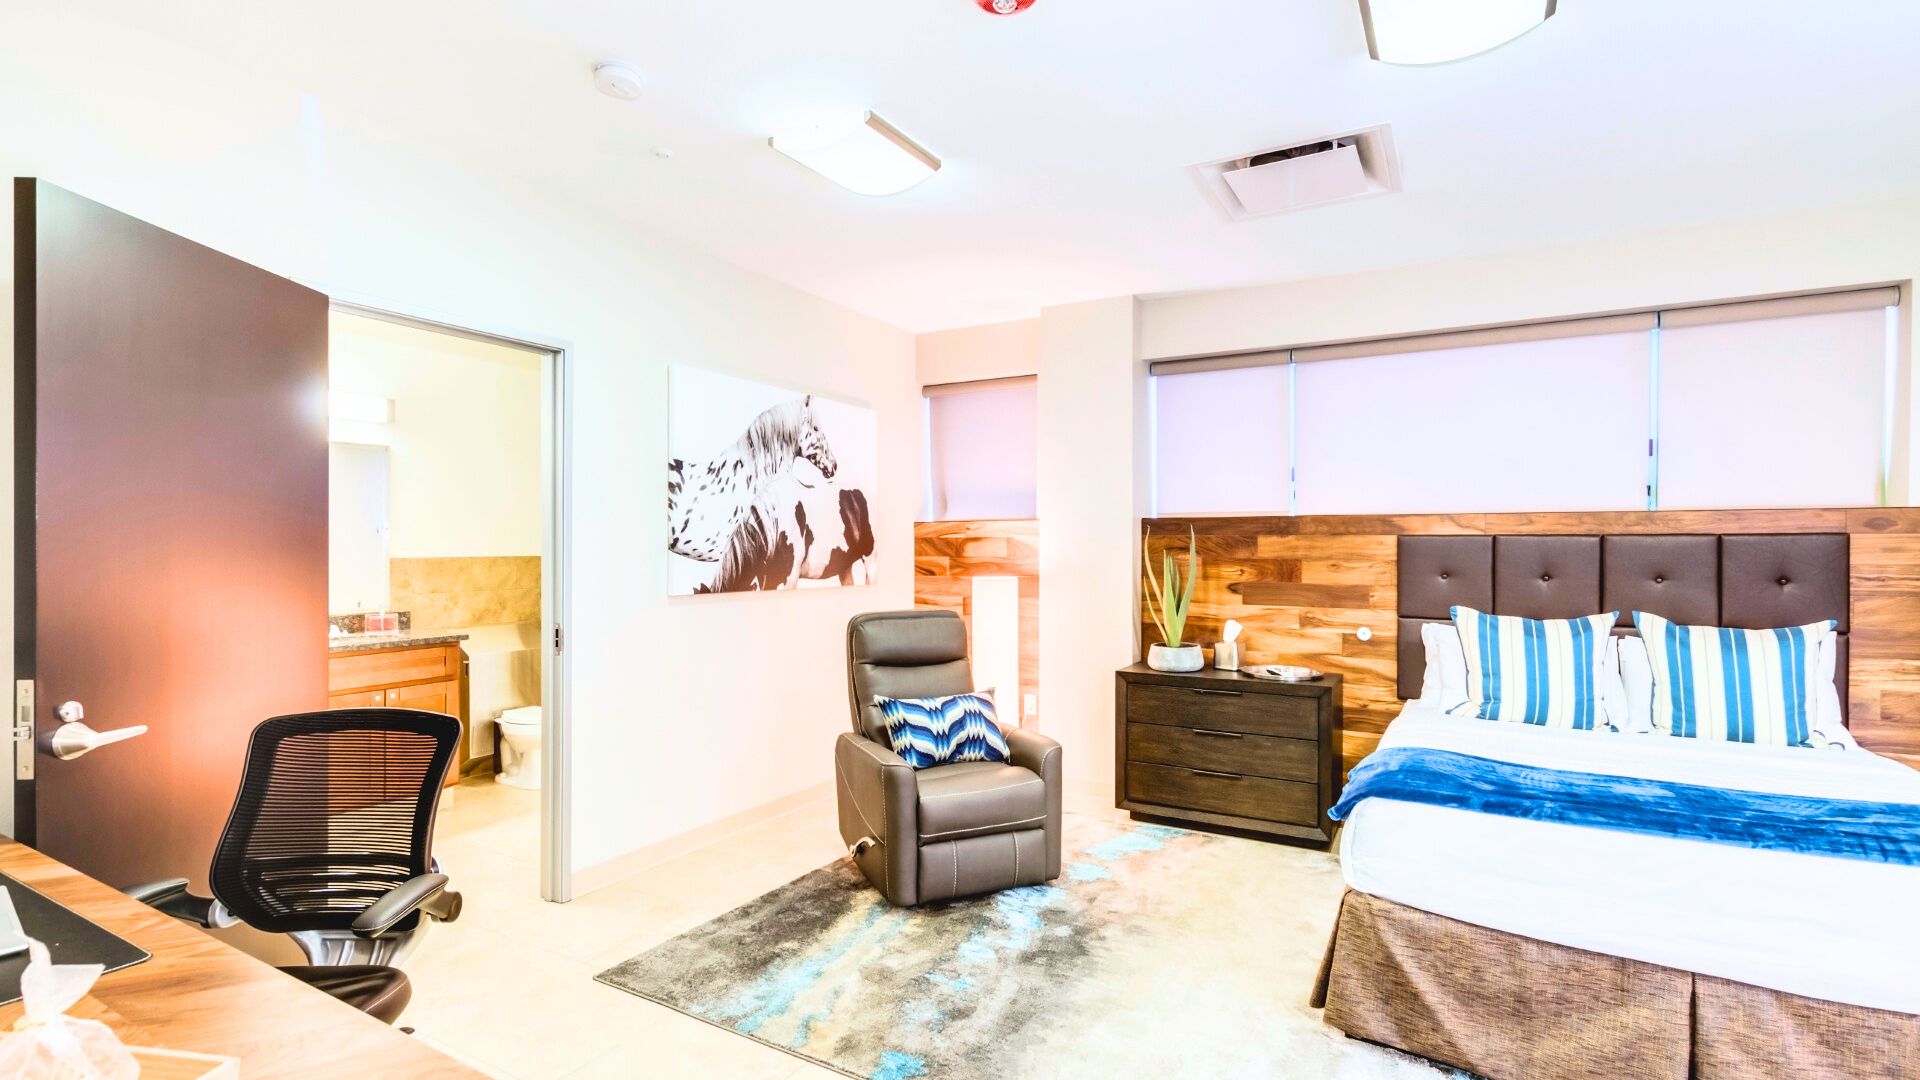 Interior View Of Scottsdale Detox For Patients Recovering From Drug And Alcohol Addiction In A Medical Detox Setting